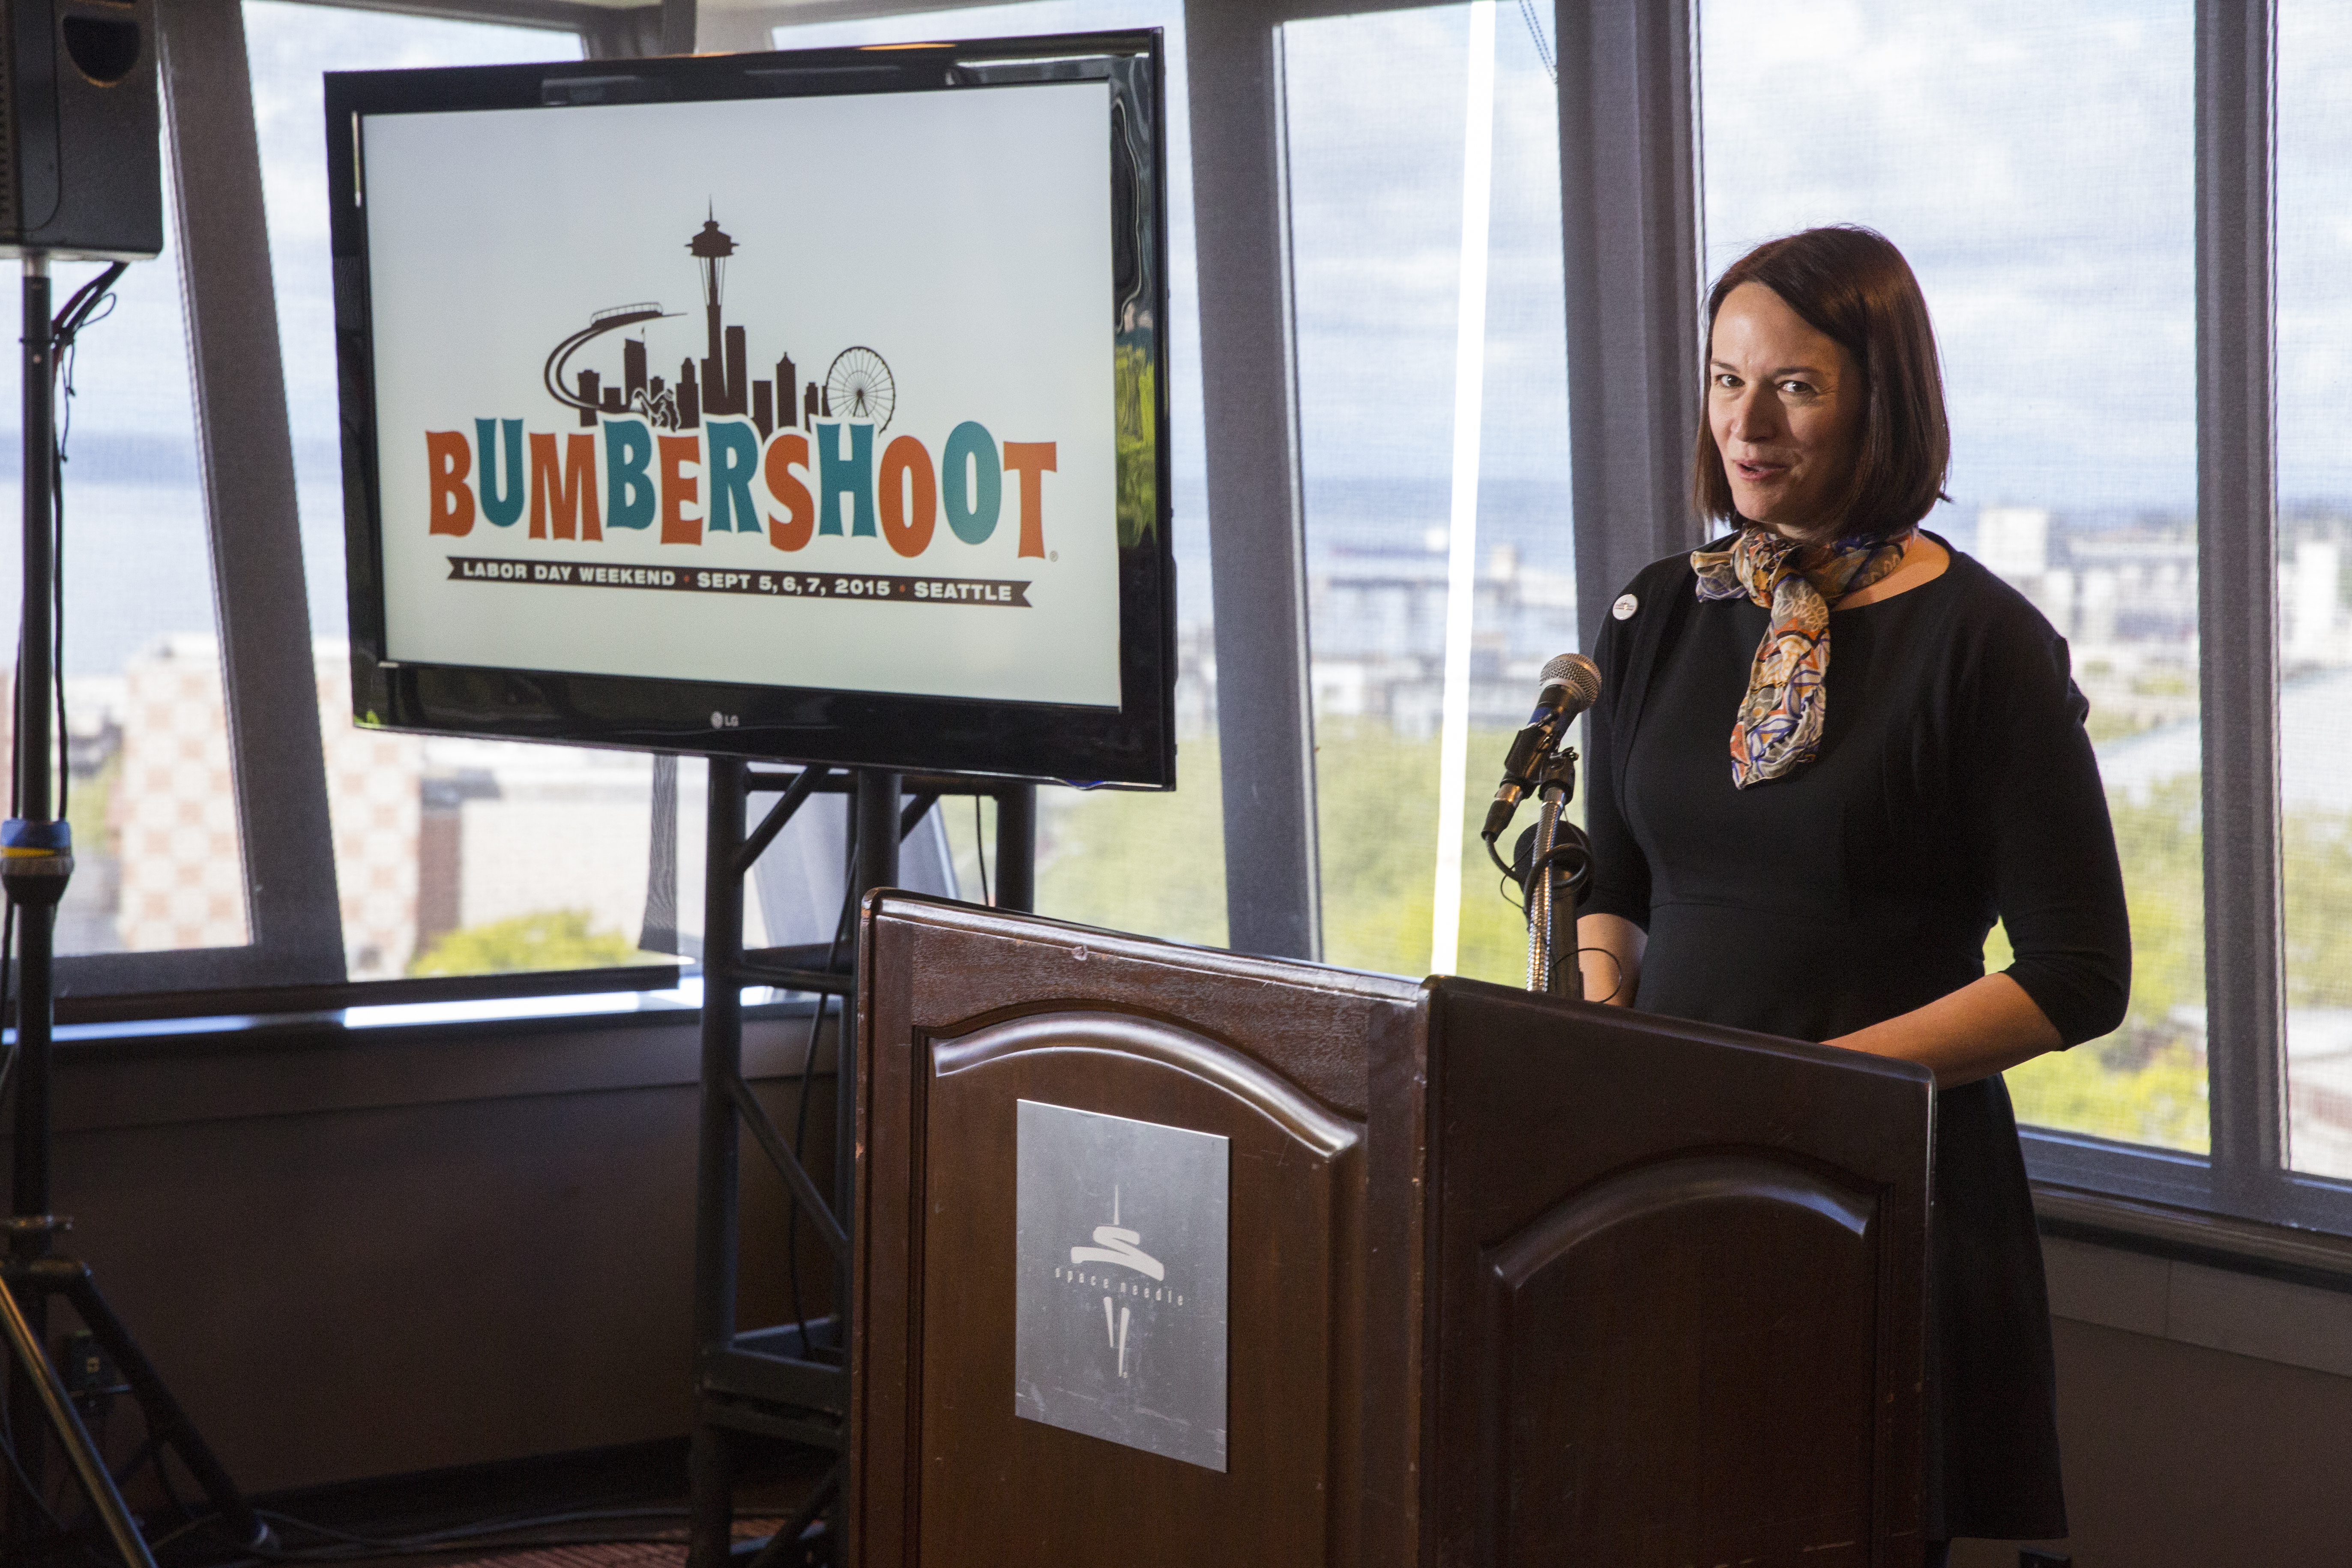 OneReel Director, Heather Smith, Bumbershoot 2015 Announcement  Photo by Alex Crick